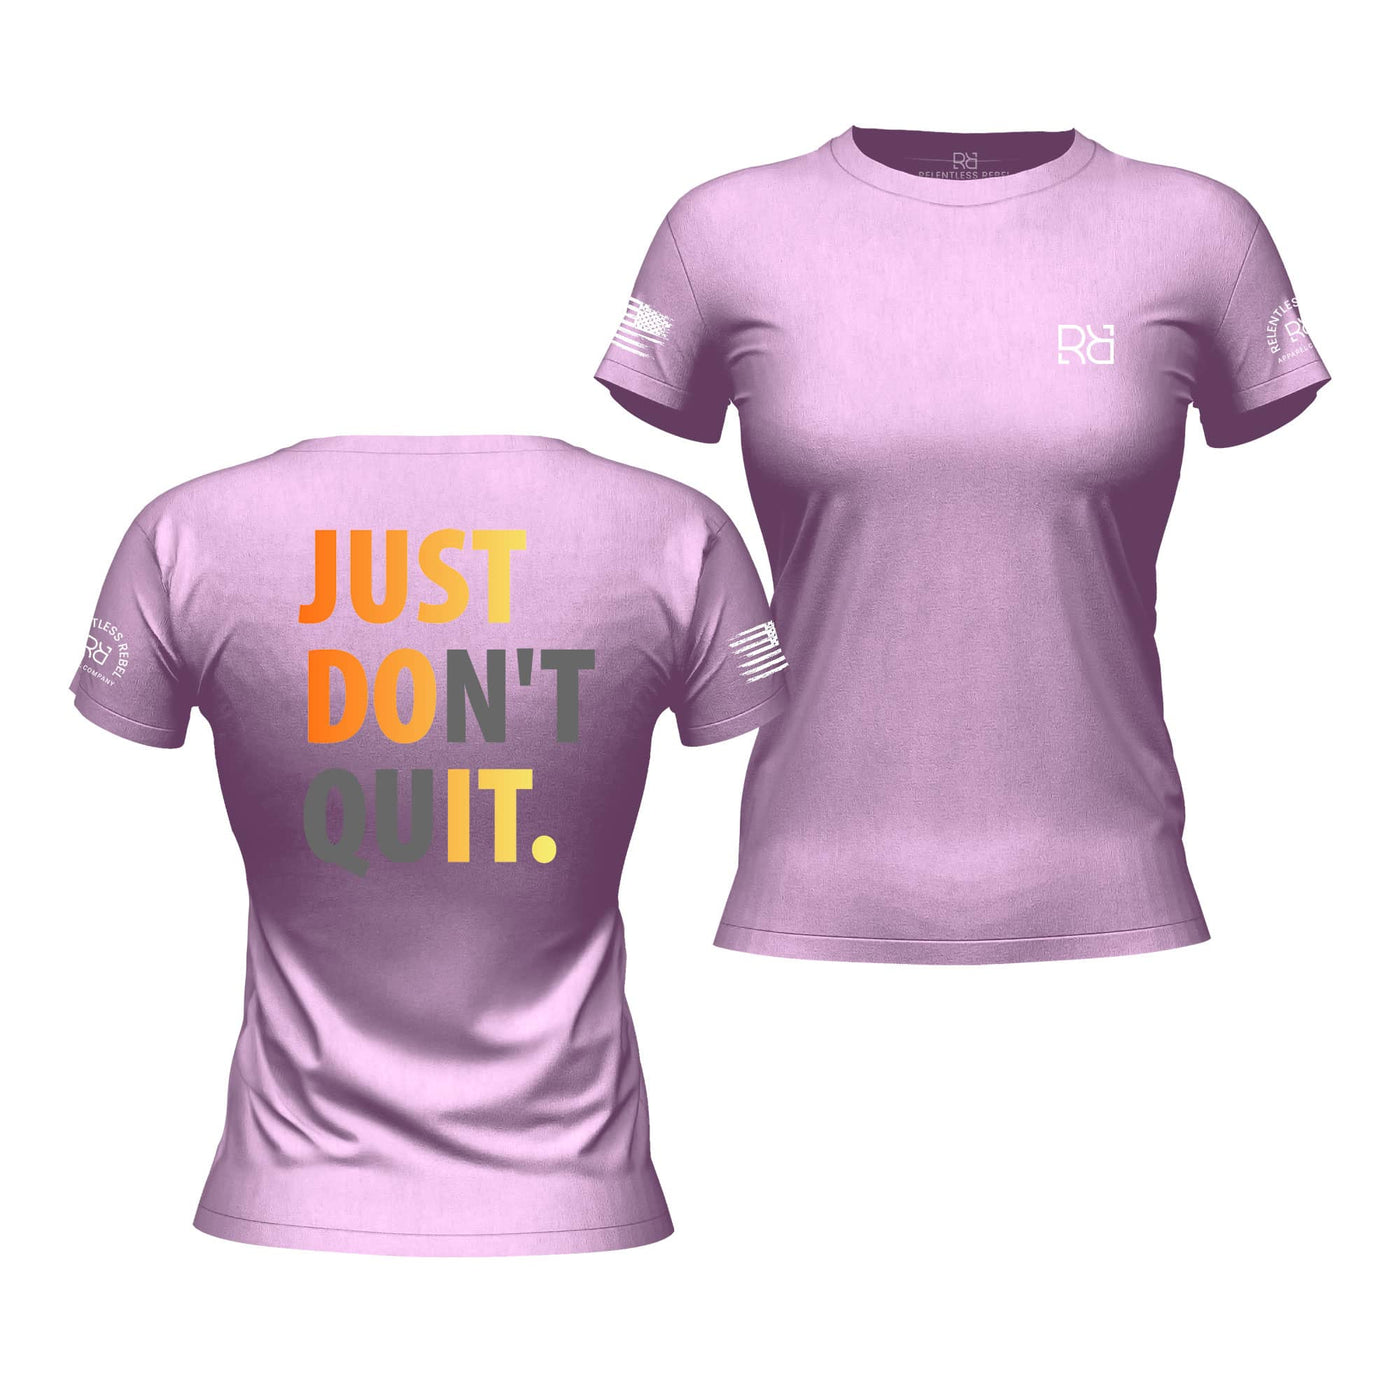 Prism Lilac Women's Just Don't Quit Back Design Tee